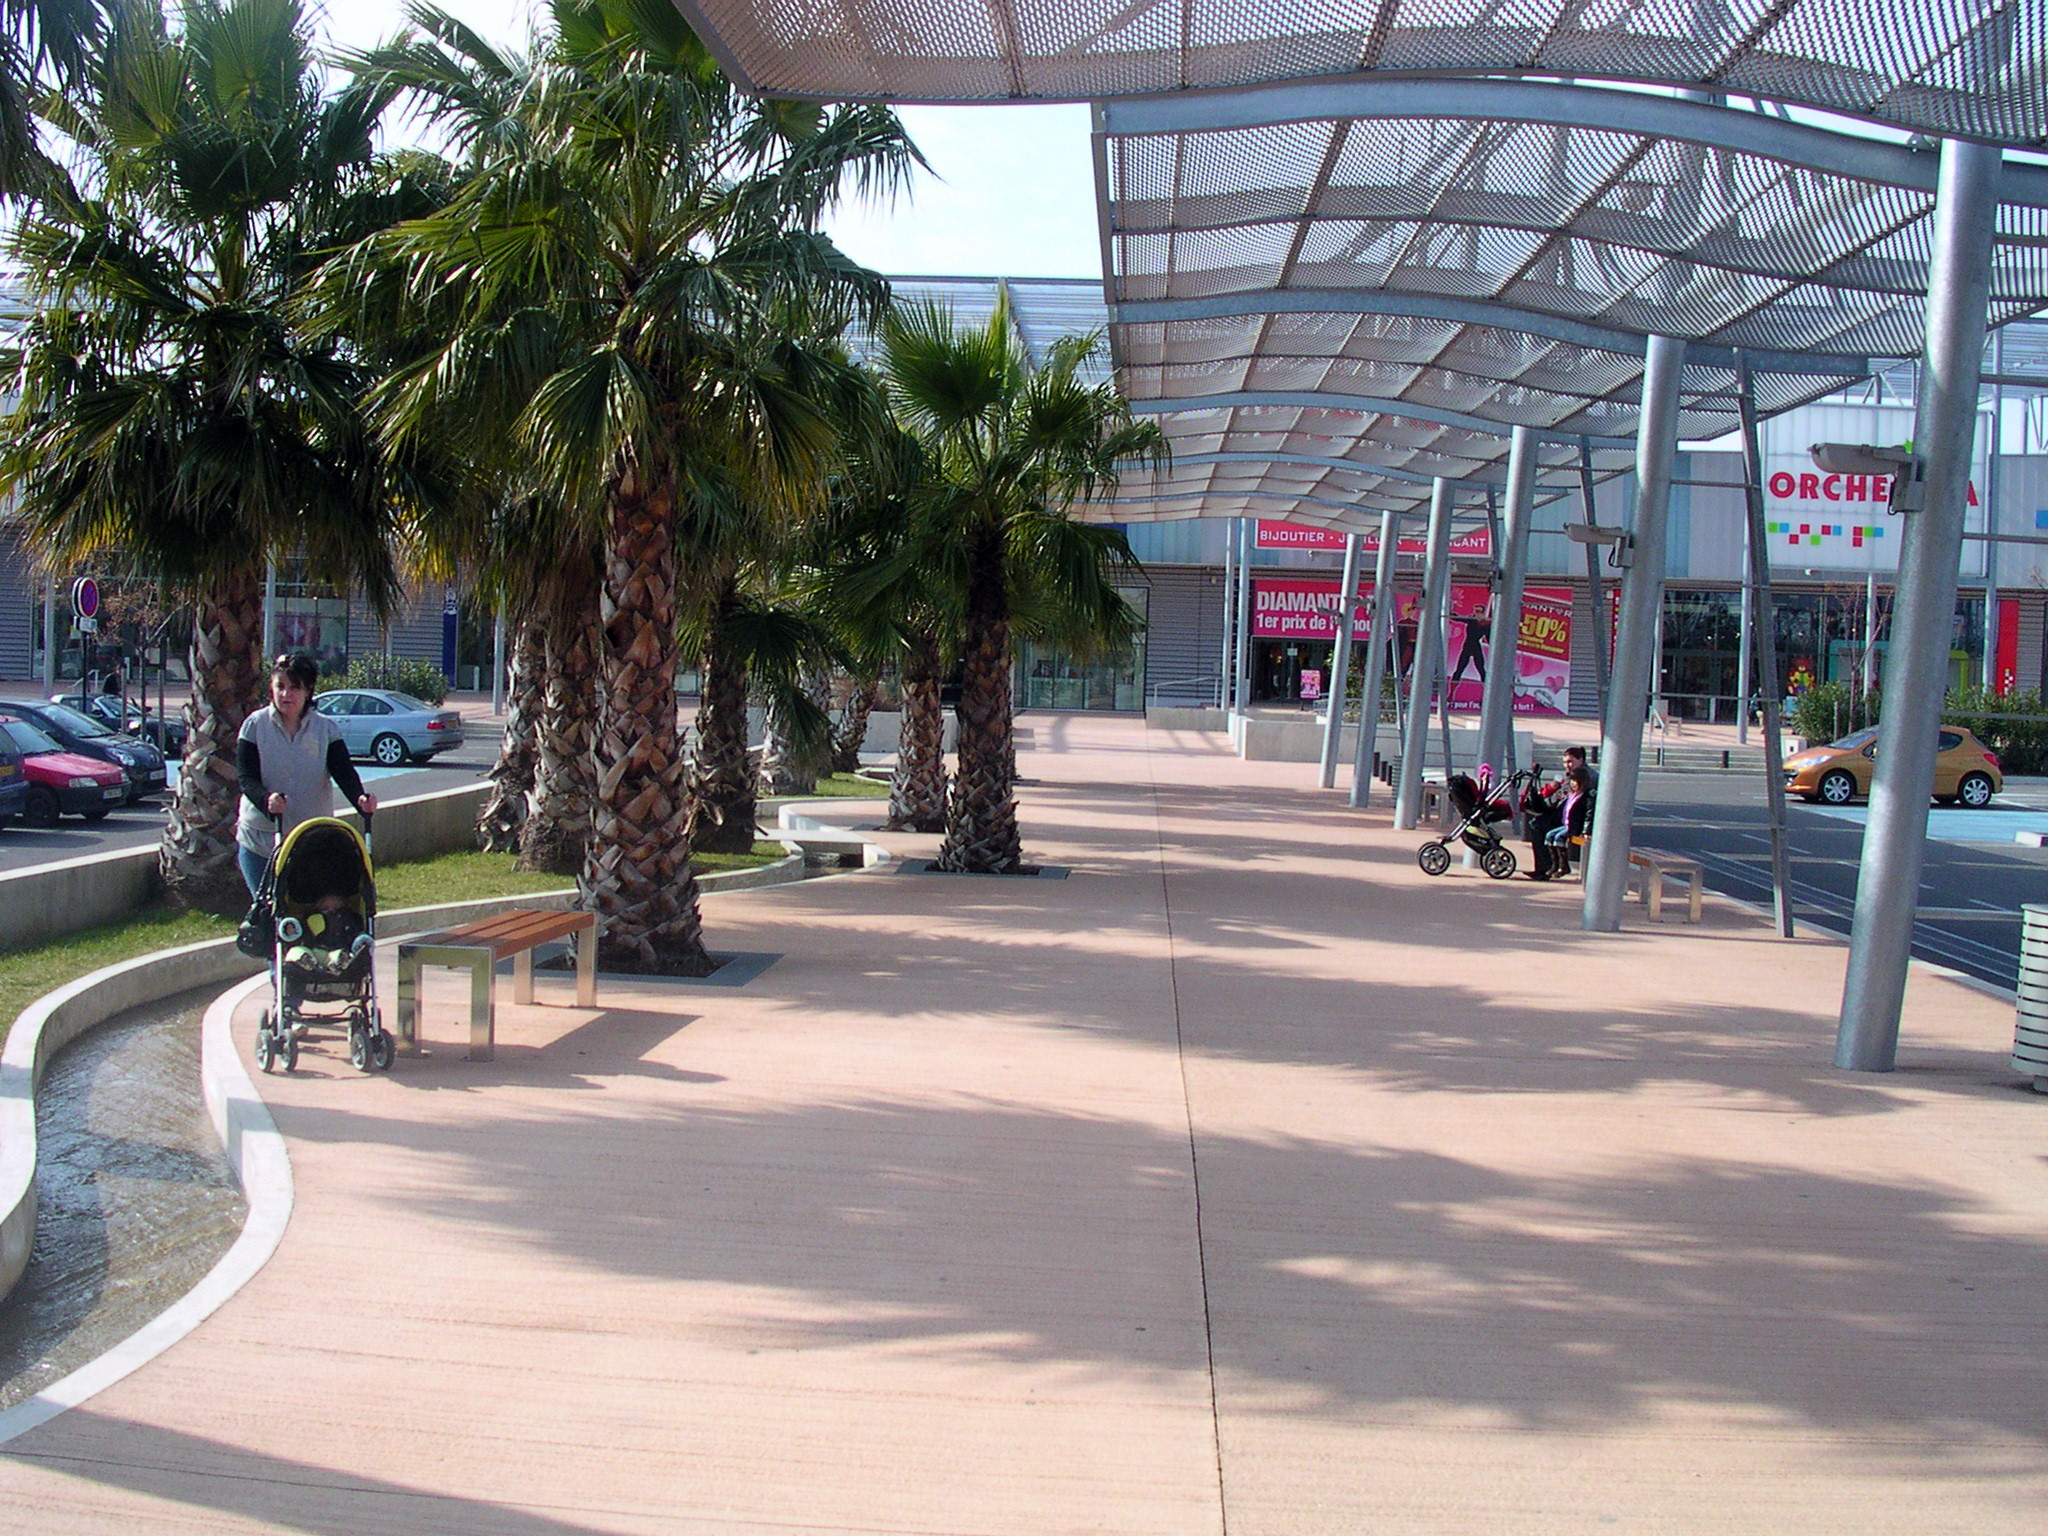 a large long covered area with some palm trees